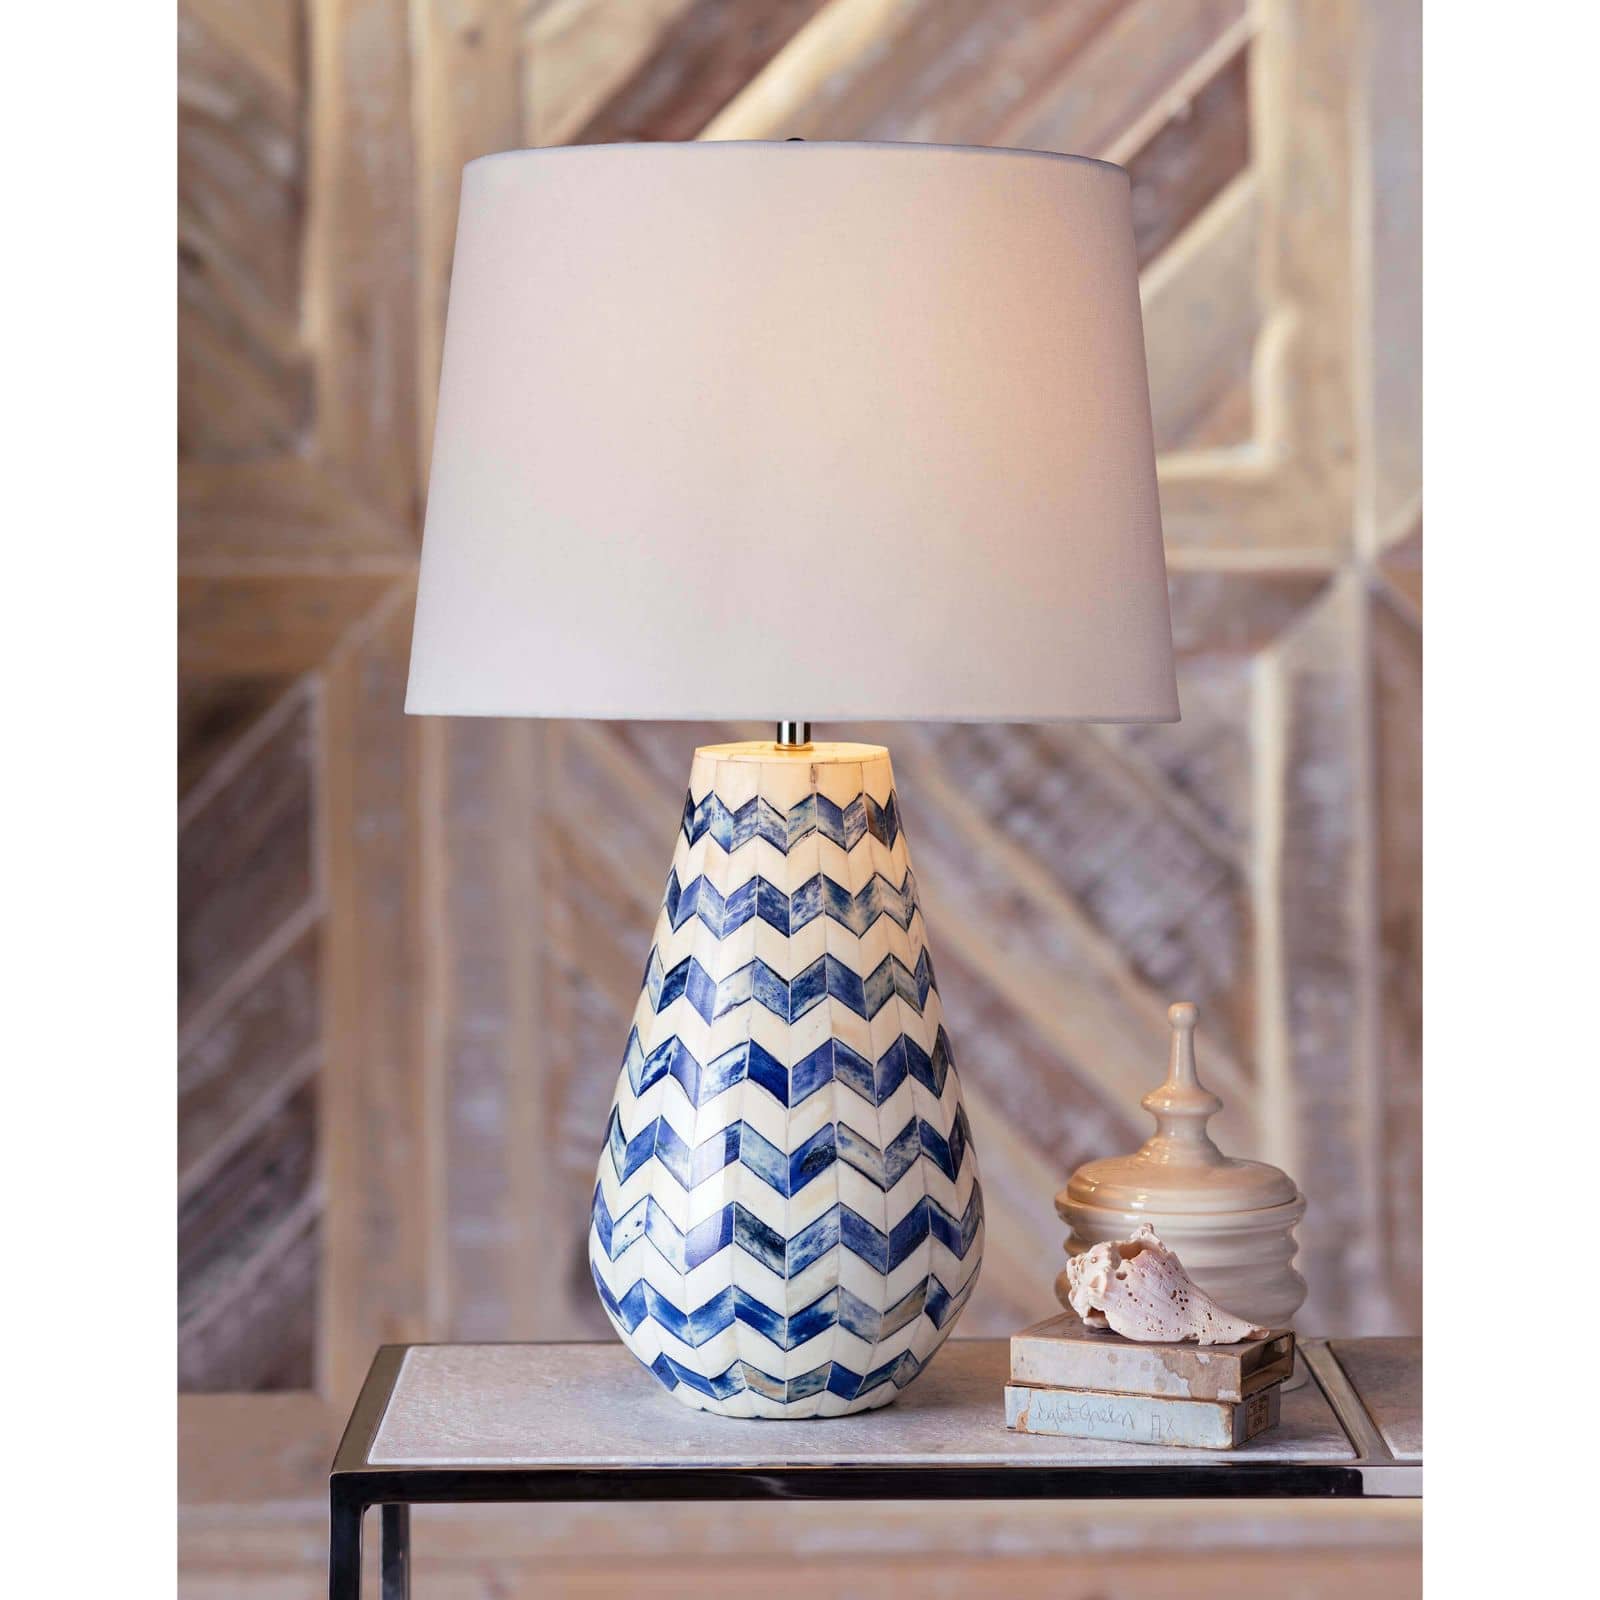 Cassia Chevron Table Lamp in Blue by Coastal Living